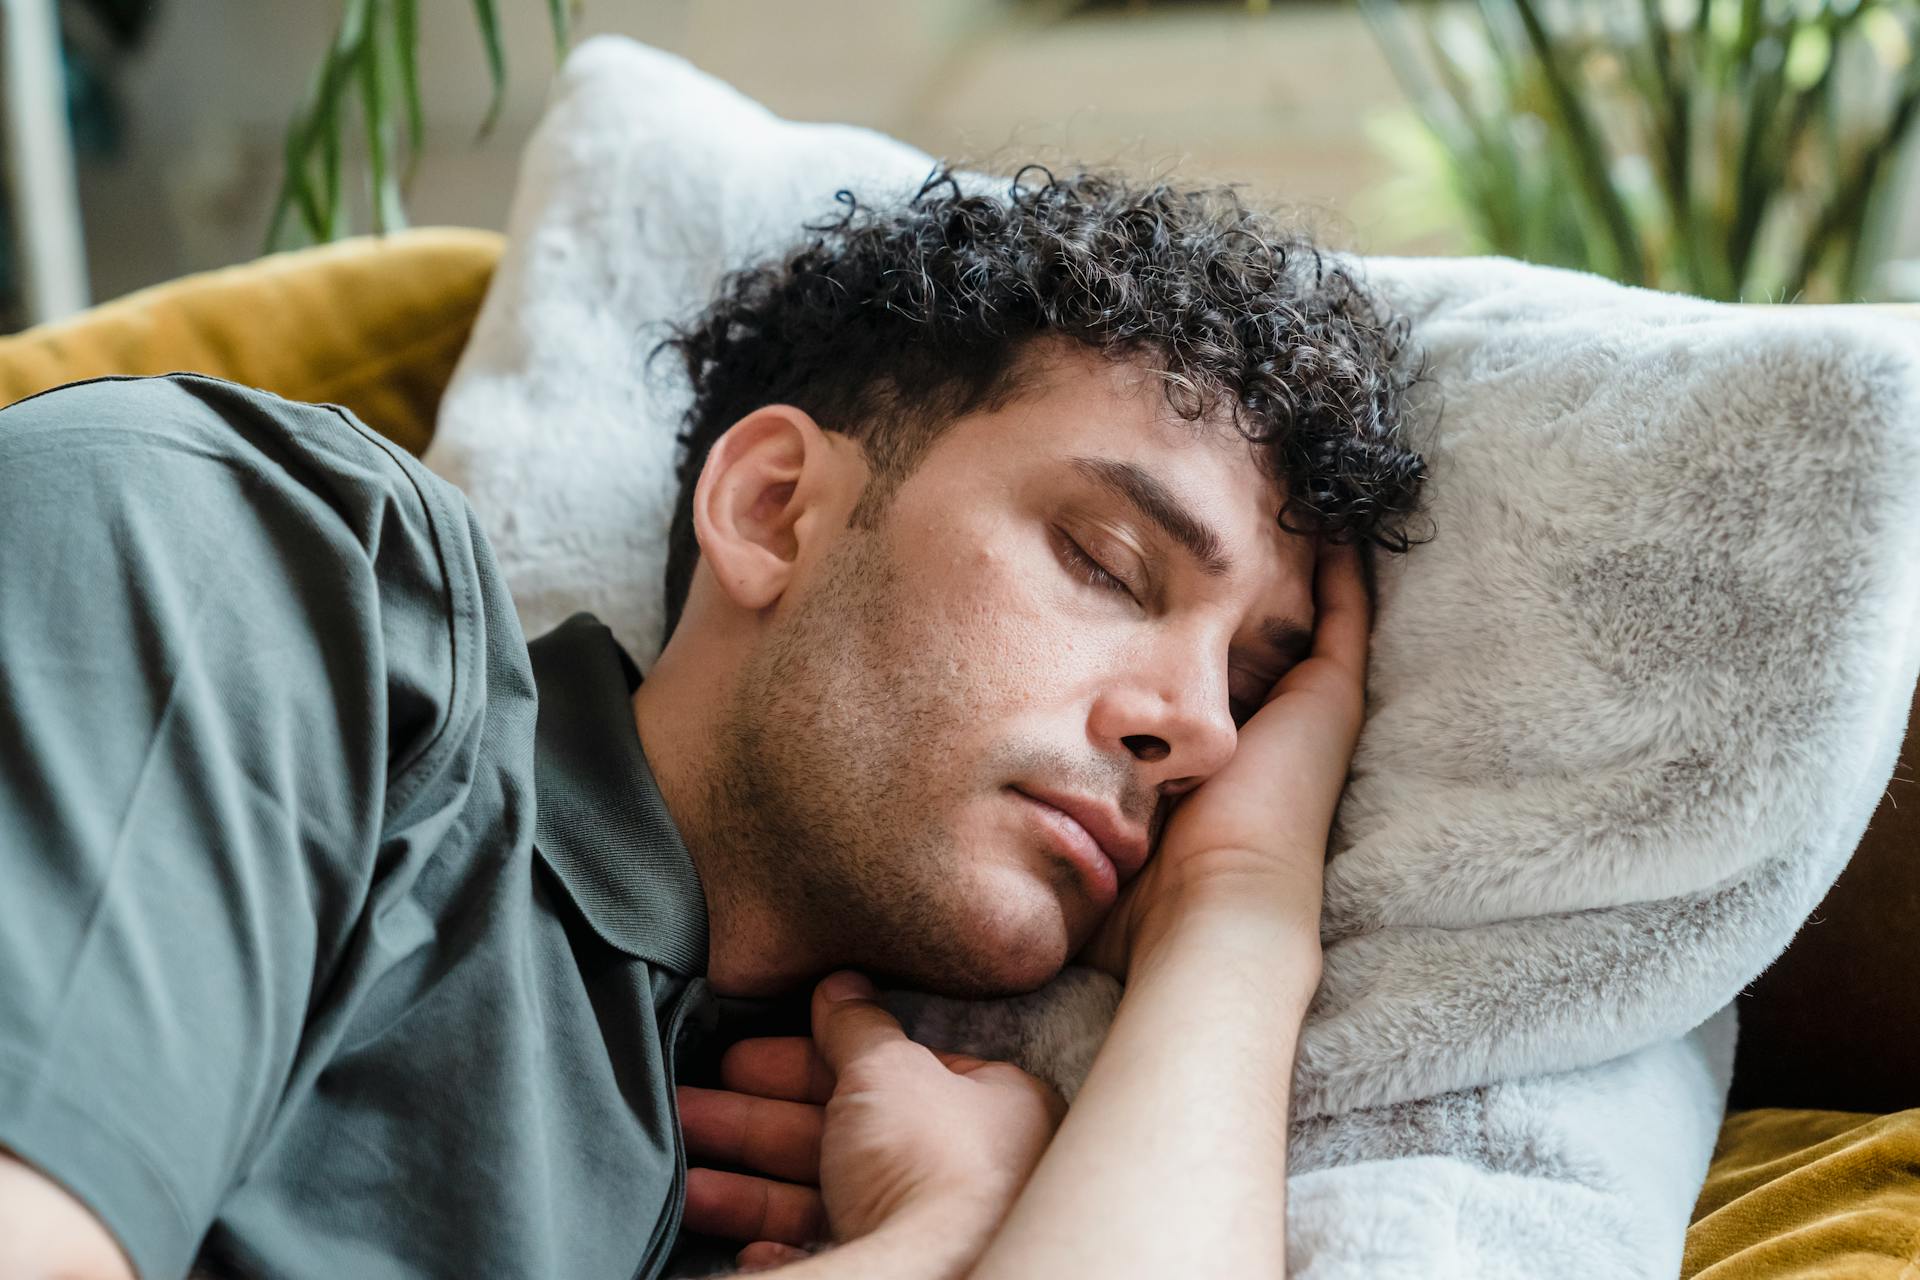 A man sleeping on a couch | Source: Pexels